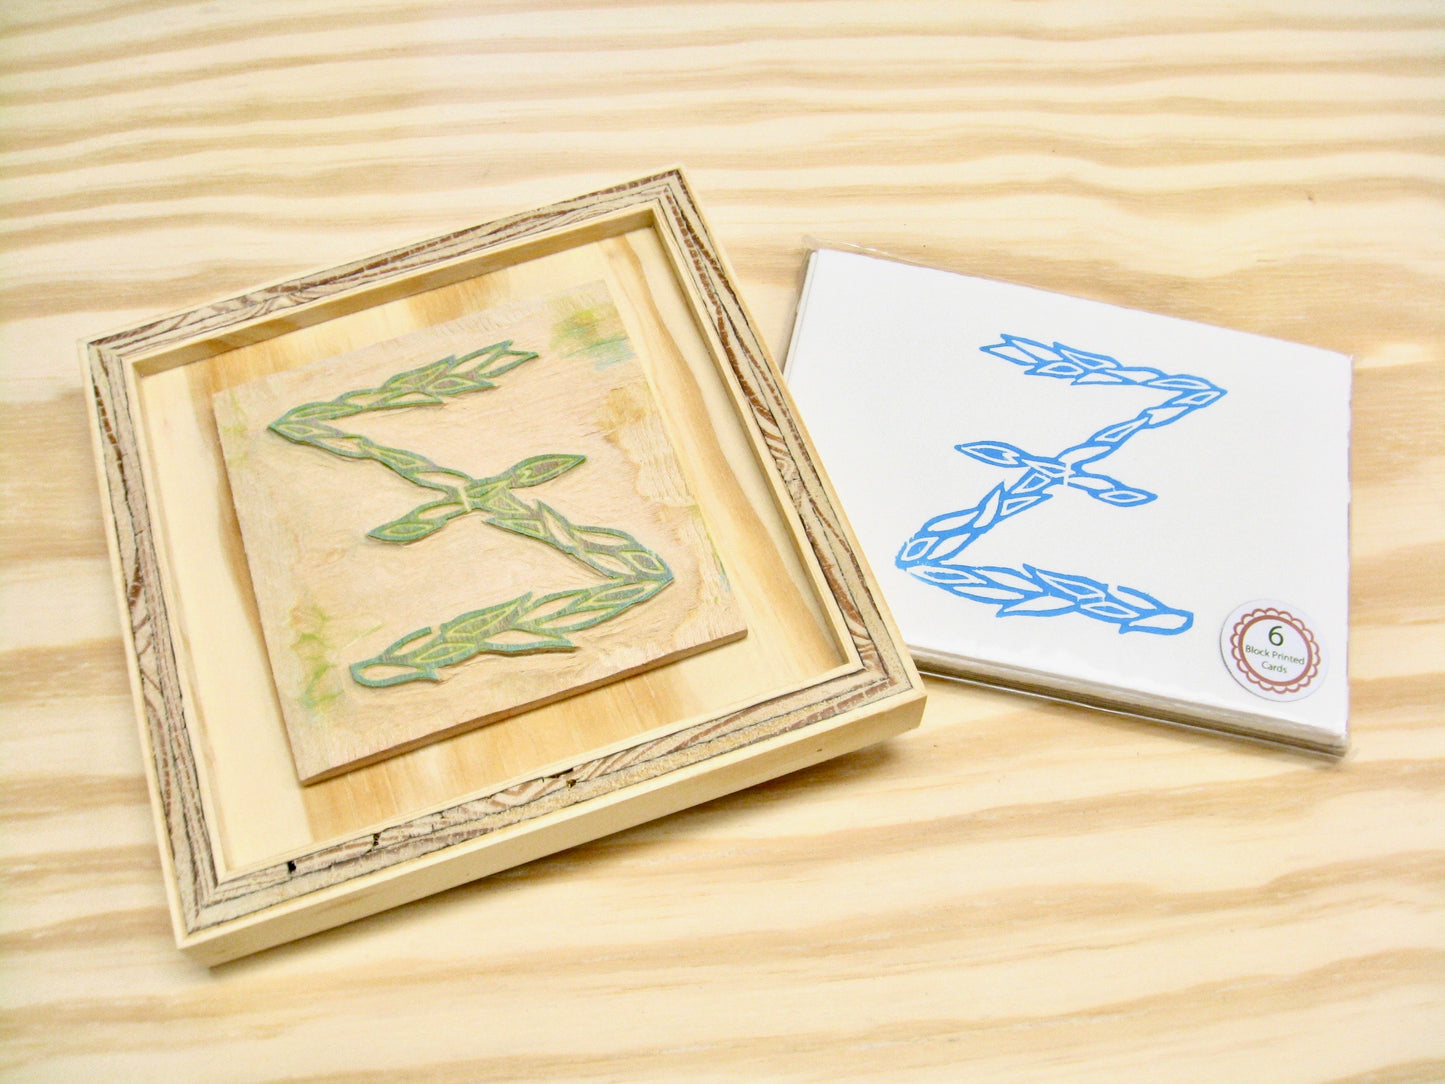 Letter Z - hand carved original printers block with 6-pack monogram greeting cards - collector's item